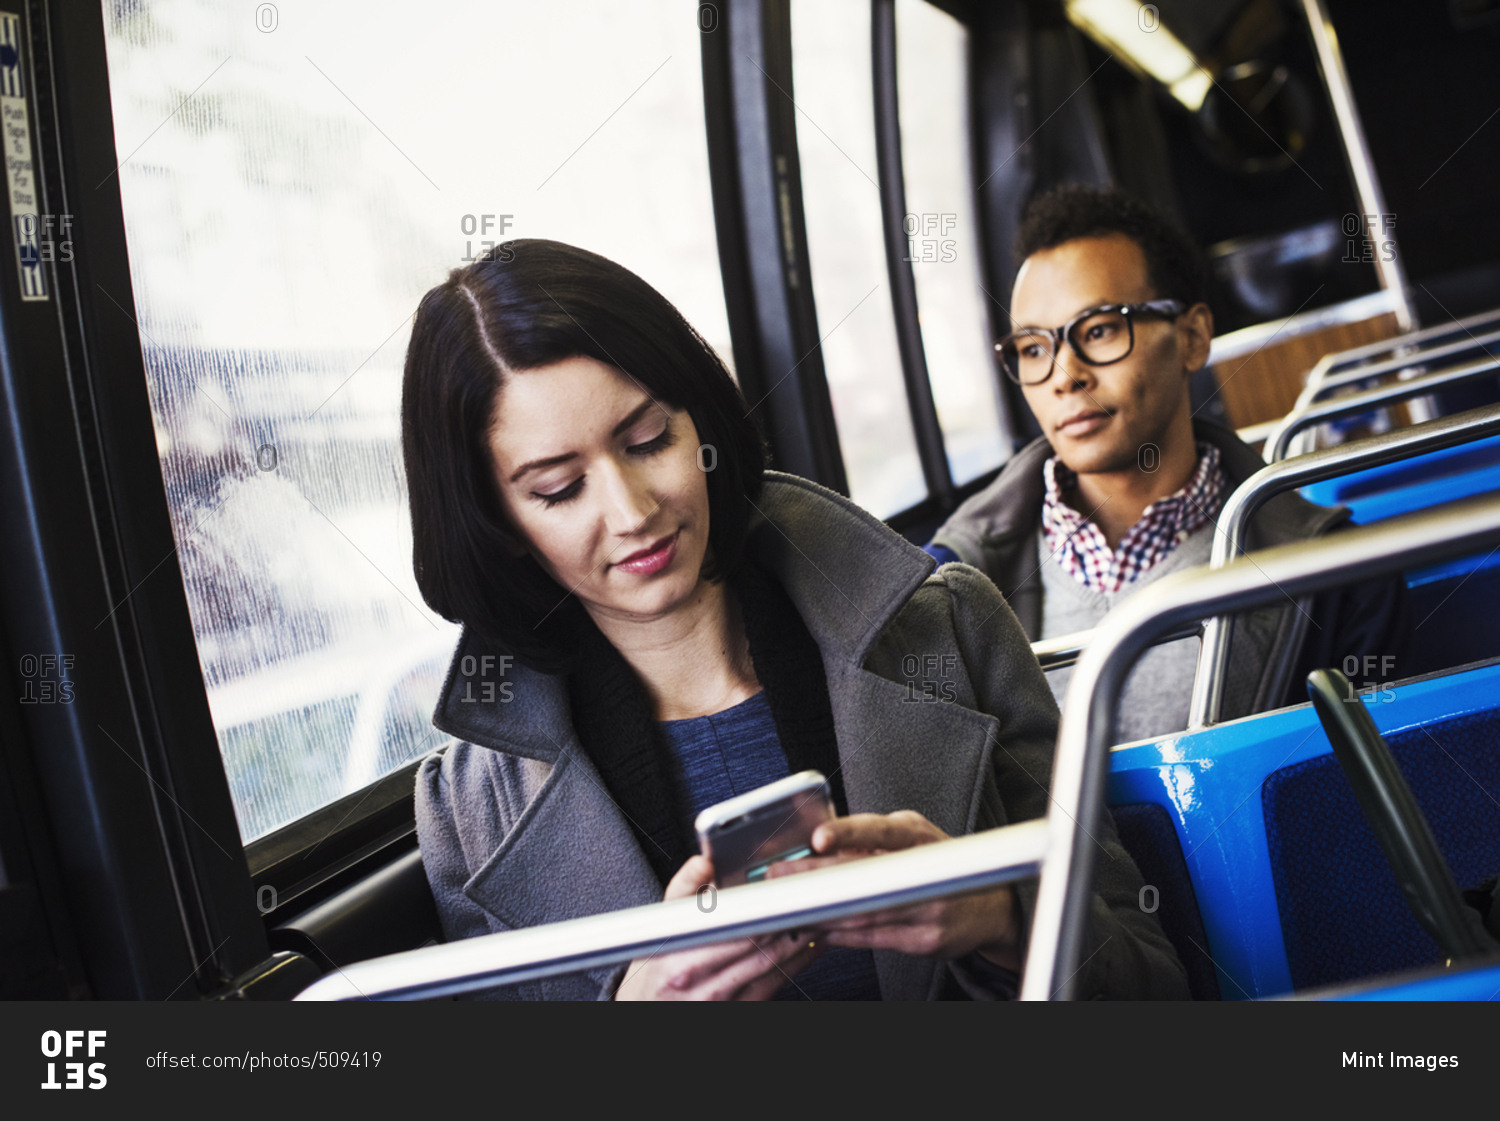 A young woman and a young man sitting on public transport, one looking at a cellphone and one looking away